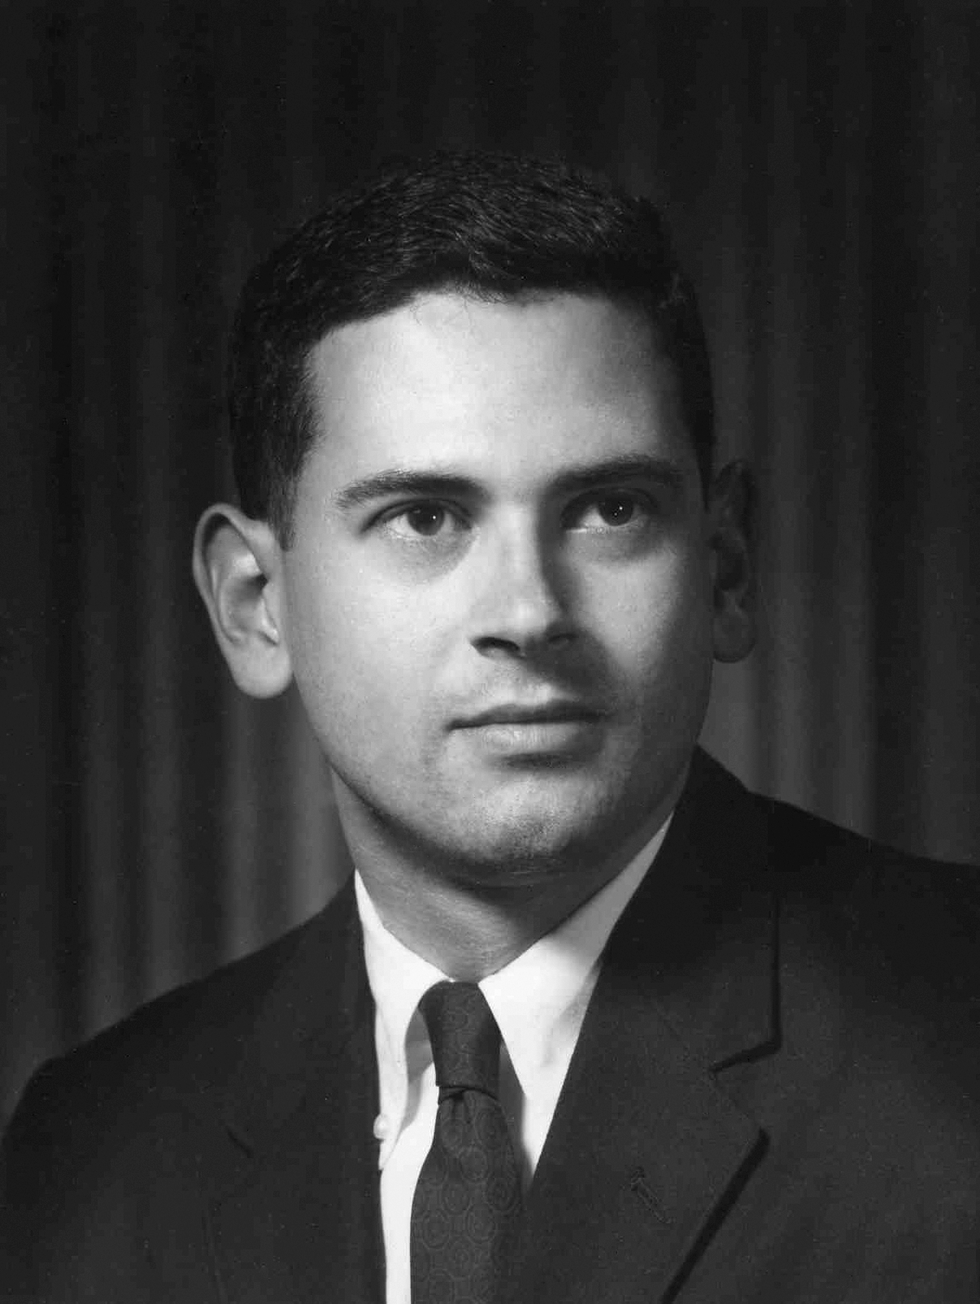 A formal black and white portrait of a man wearing a suit and tie.